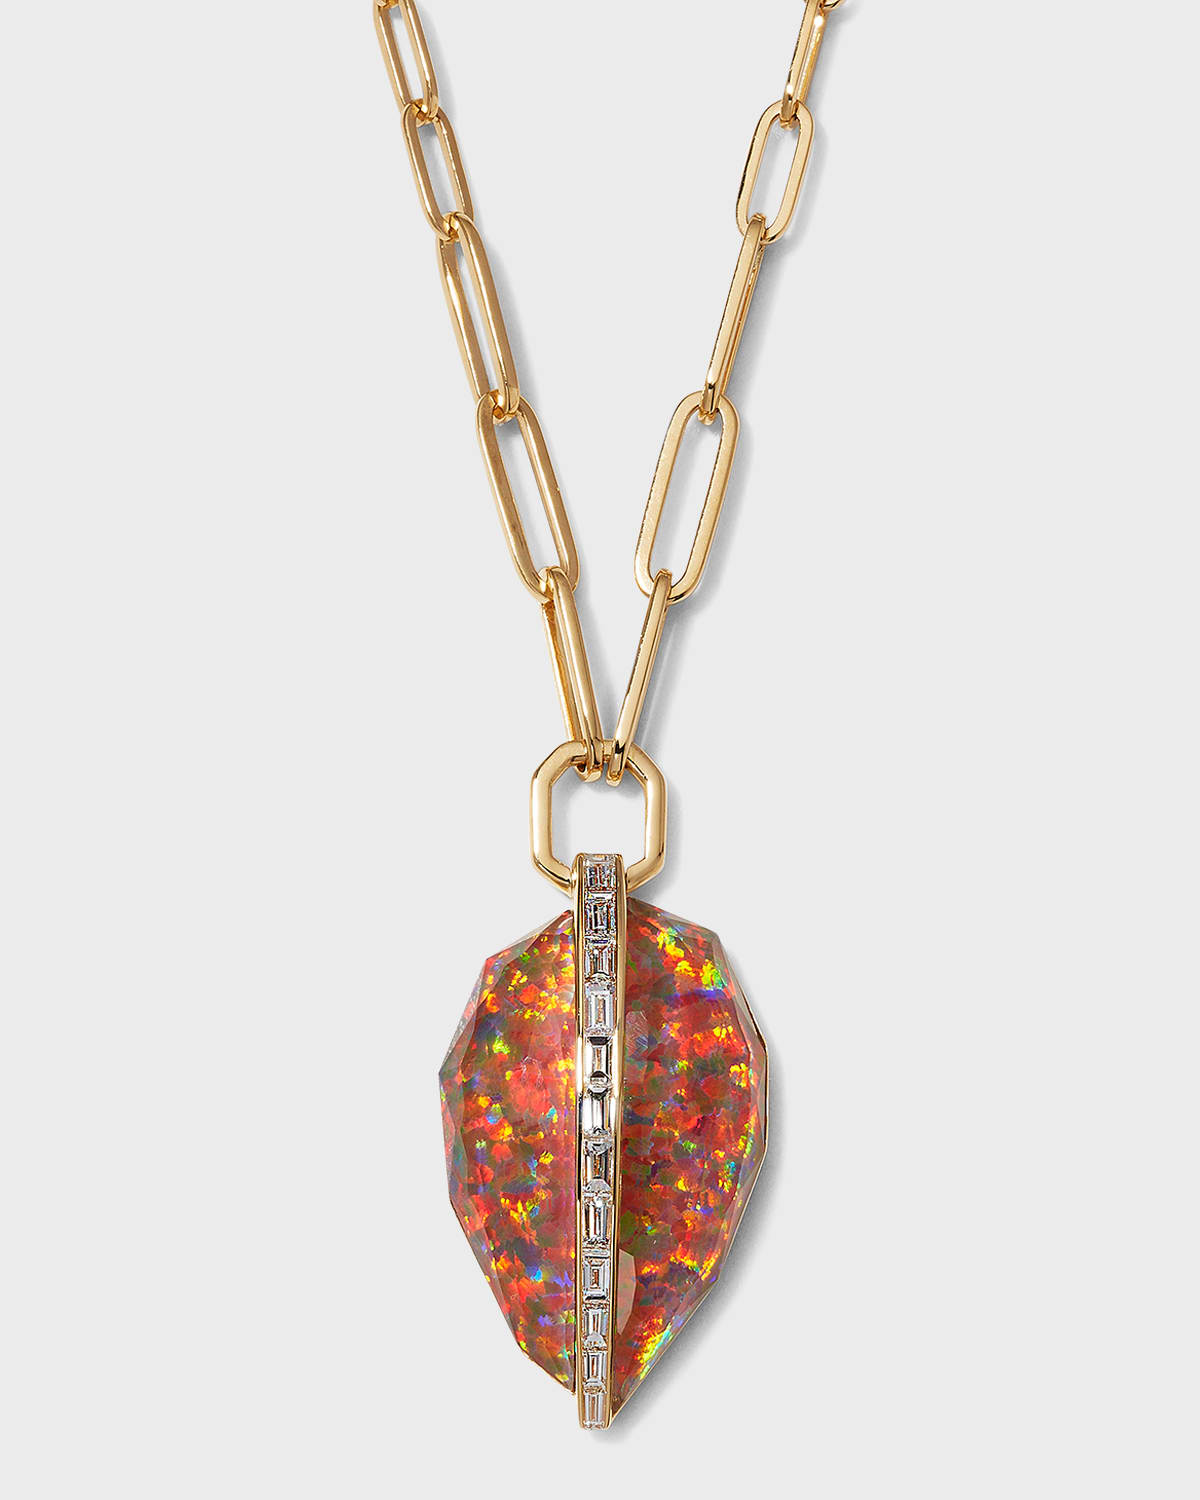 Stephen Webster Large Diced Pear Pendant Necklace With Fire Opalescent Quartz